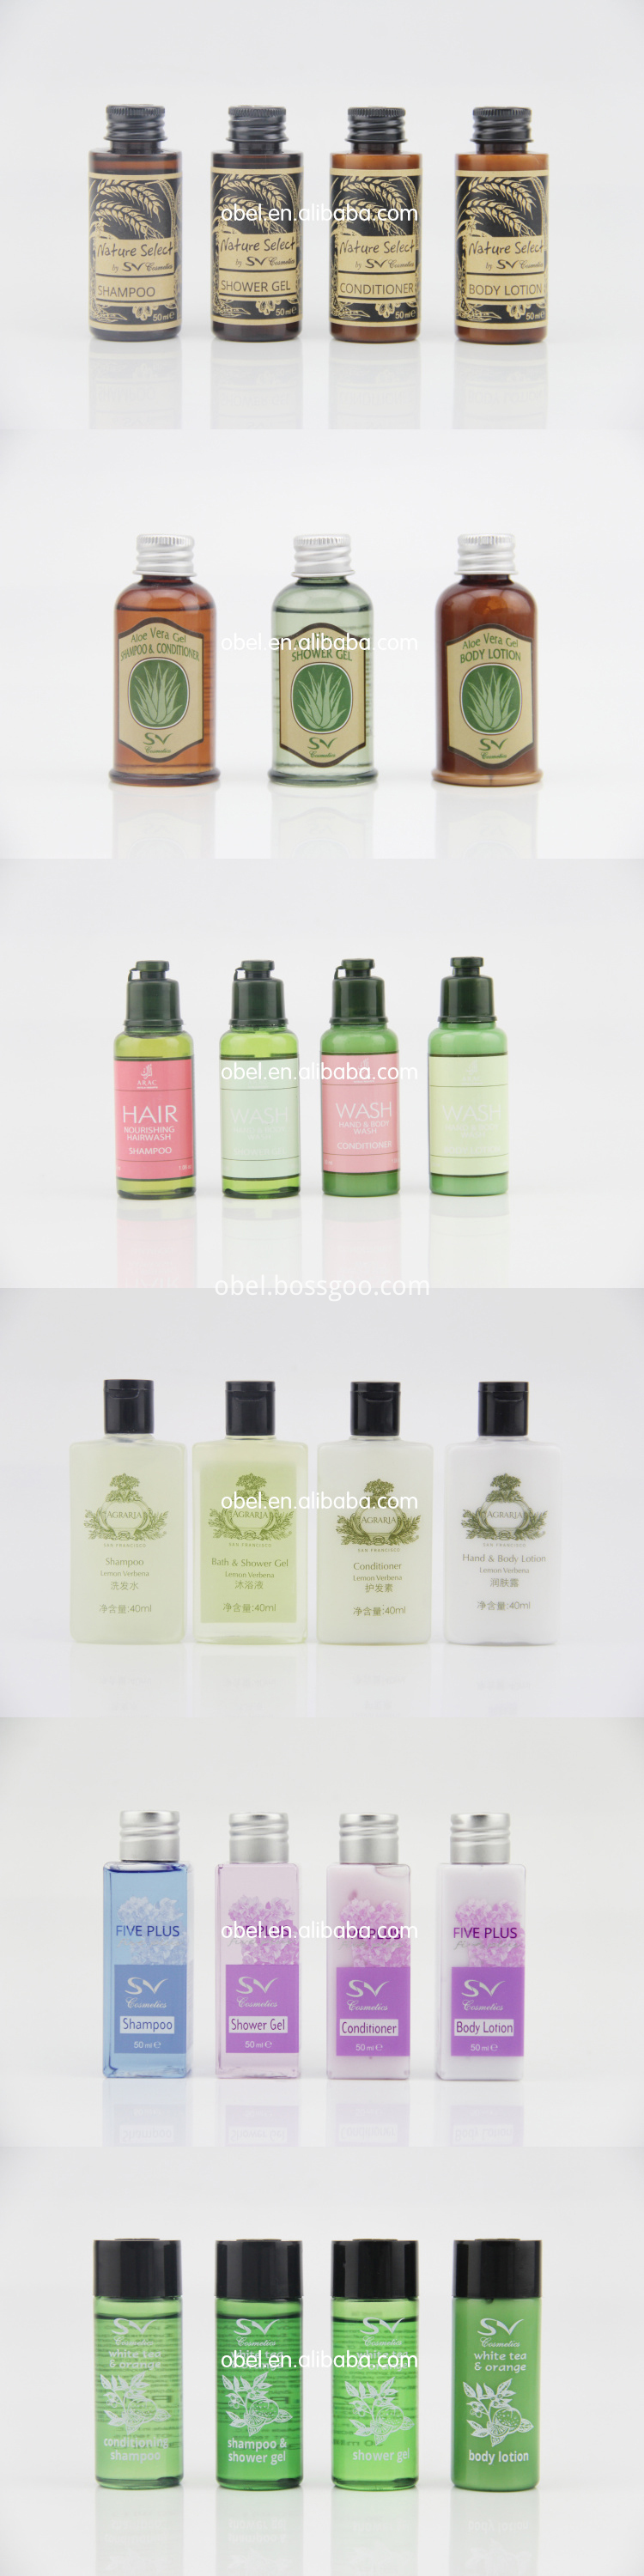 Hospitality Toiletries Suppliers